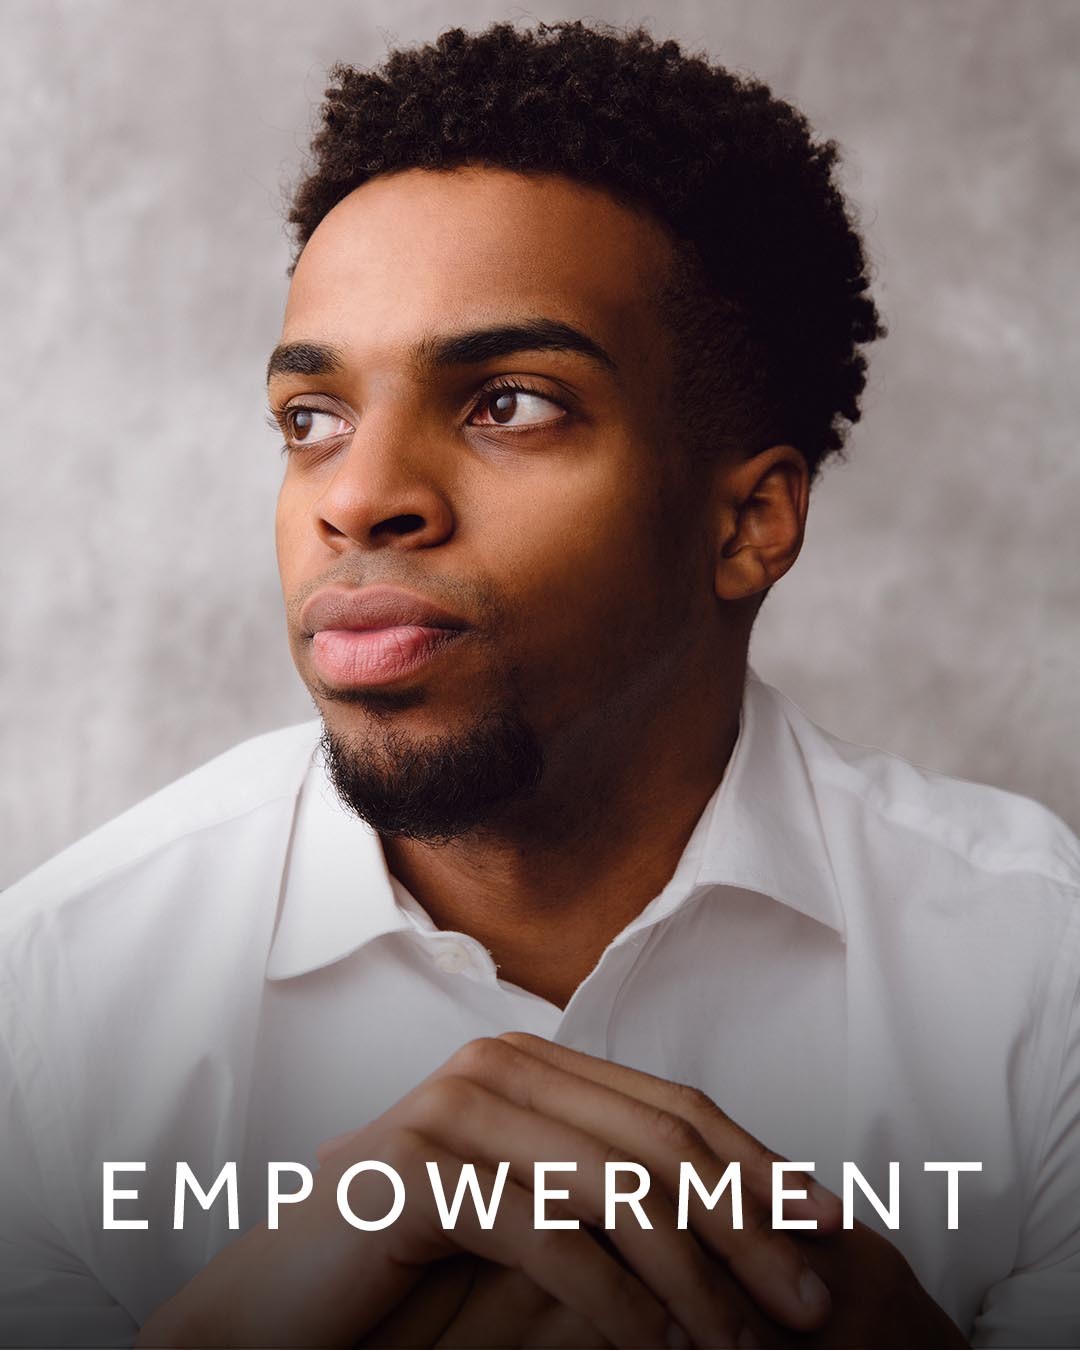 An image of Louis Smith overlaid with the word ‘empowerment’.